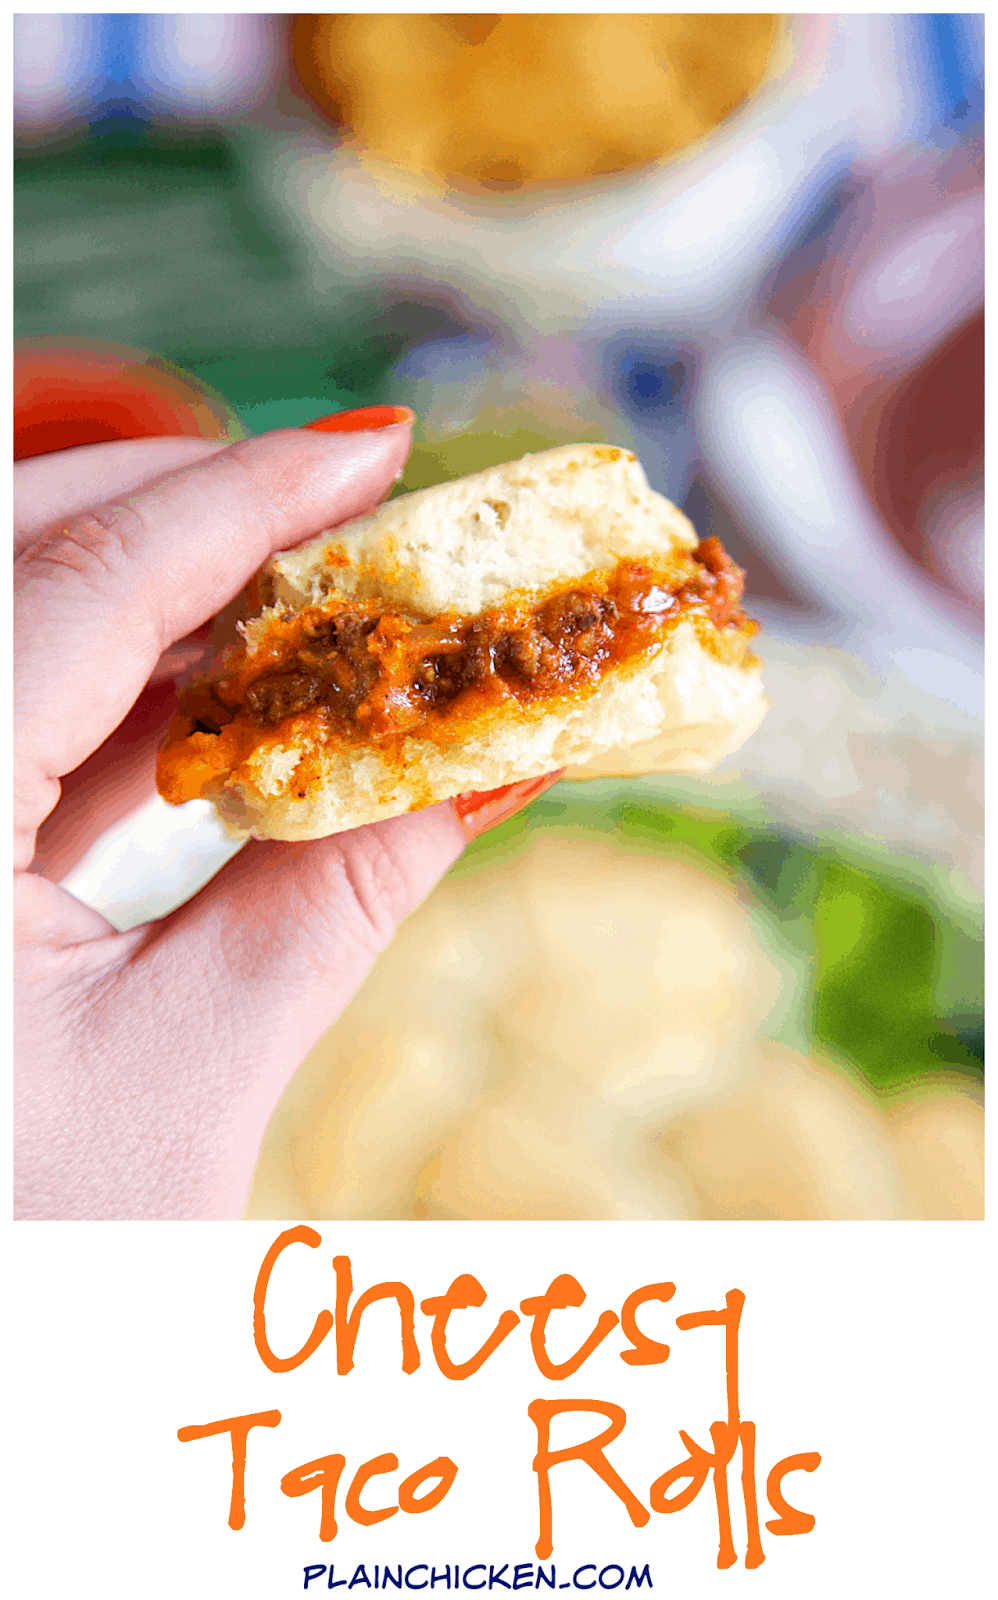 Cheesy Taco Rolls - Sister Schubert rolls stuffed with cheese and spicy taco meat! SO easy and SO good! Top with your favorite taco toppings. Can make ahead and freeze for later. Great for parties or a fun twist to taco night. 